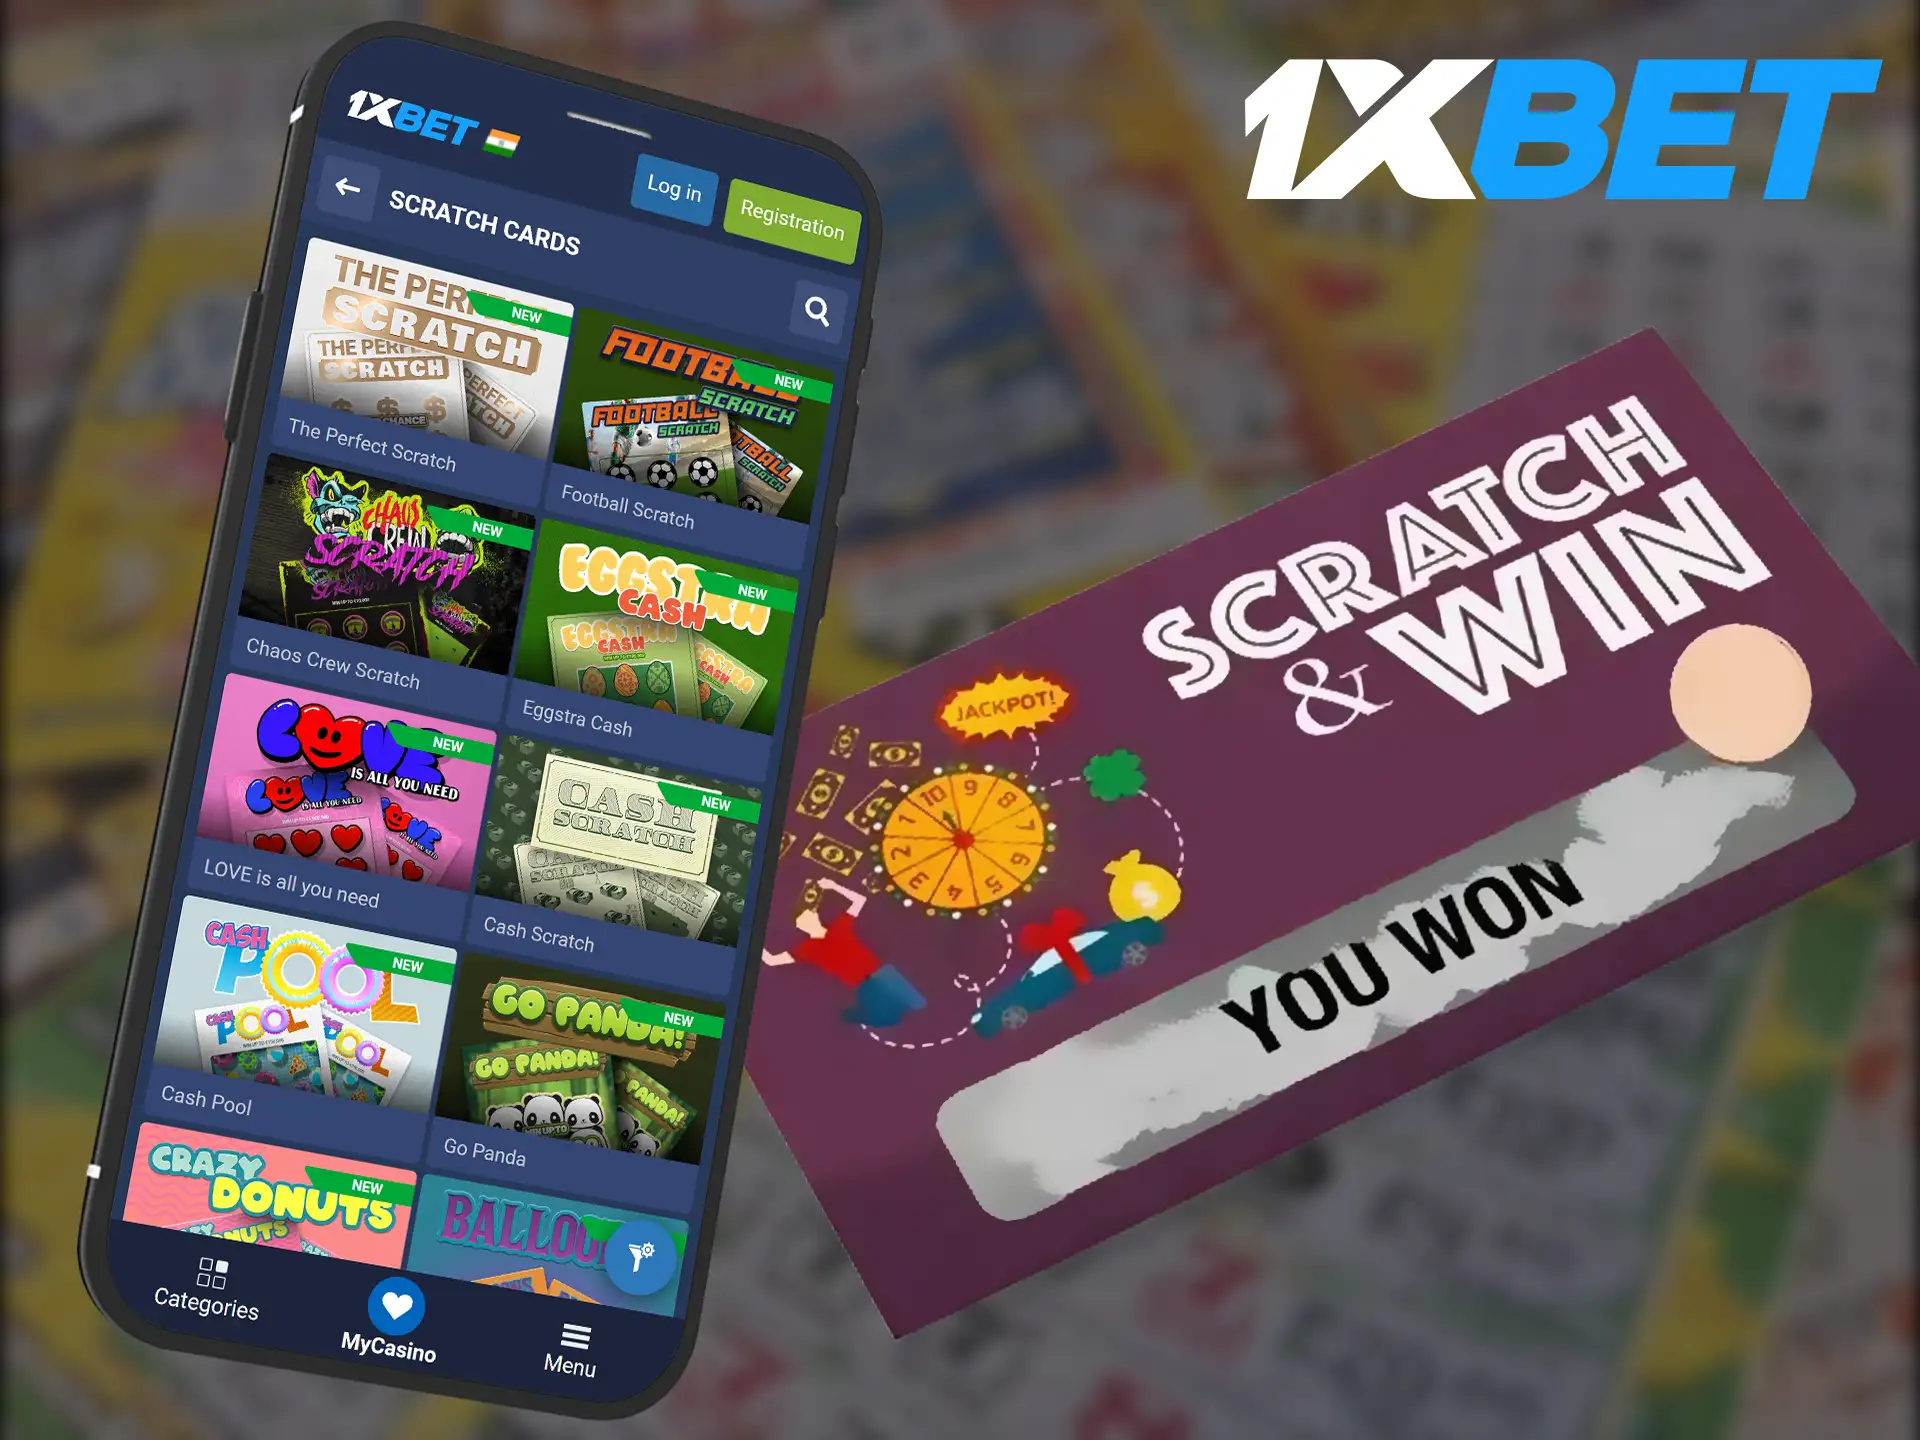 Uncover hidden prizes by playing scratch cards at 1xBet.